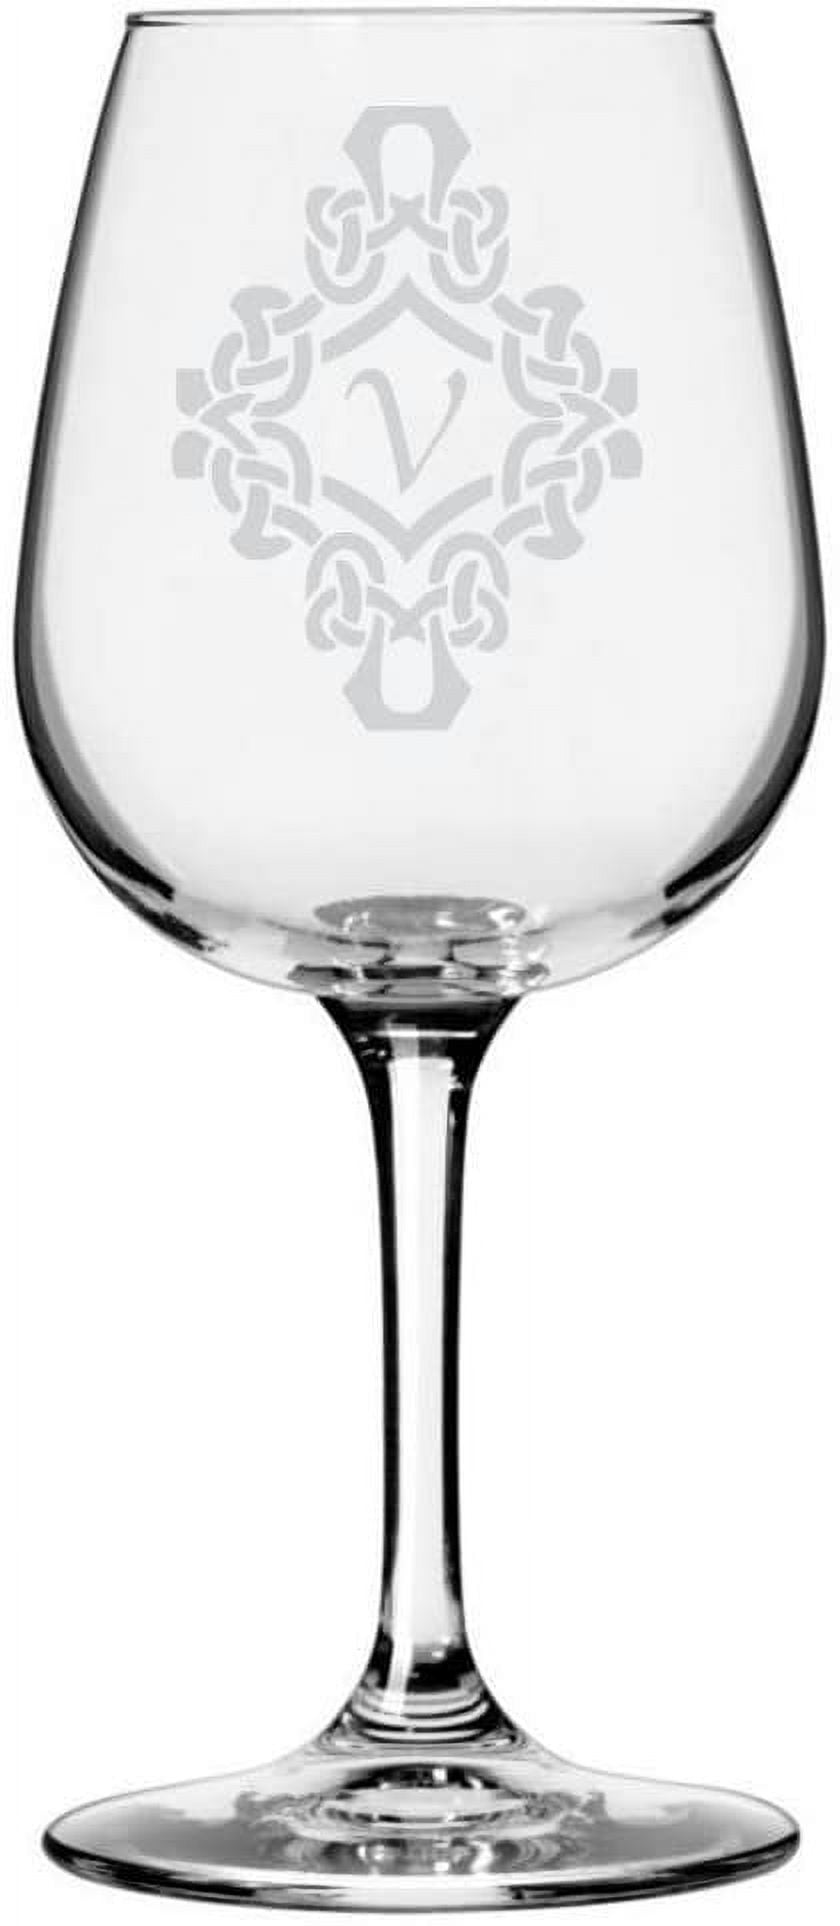 Personalized Laser-Etched Wine Glass w/Celtic Love Knot Monogram